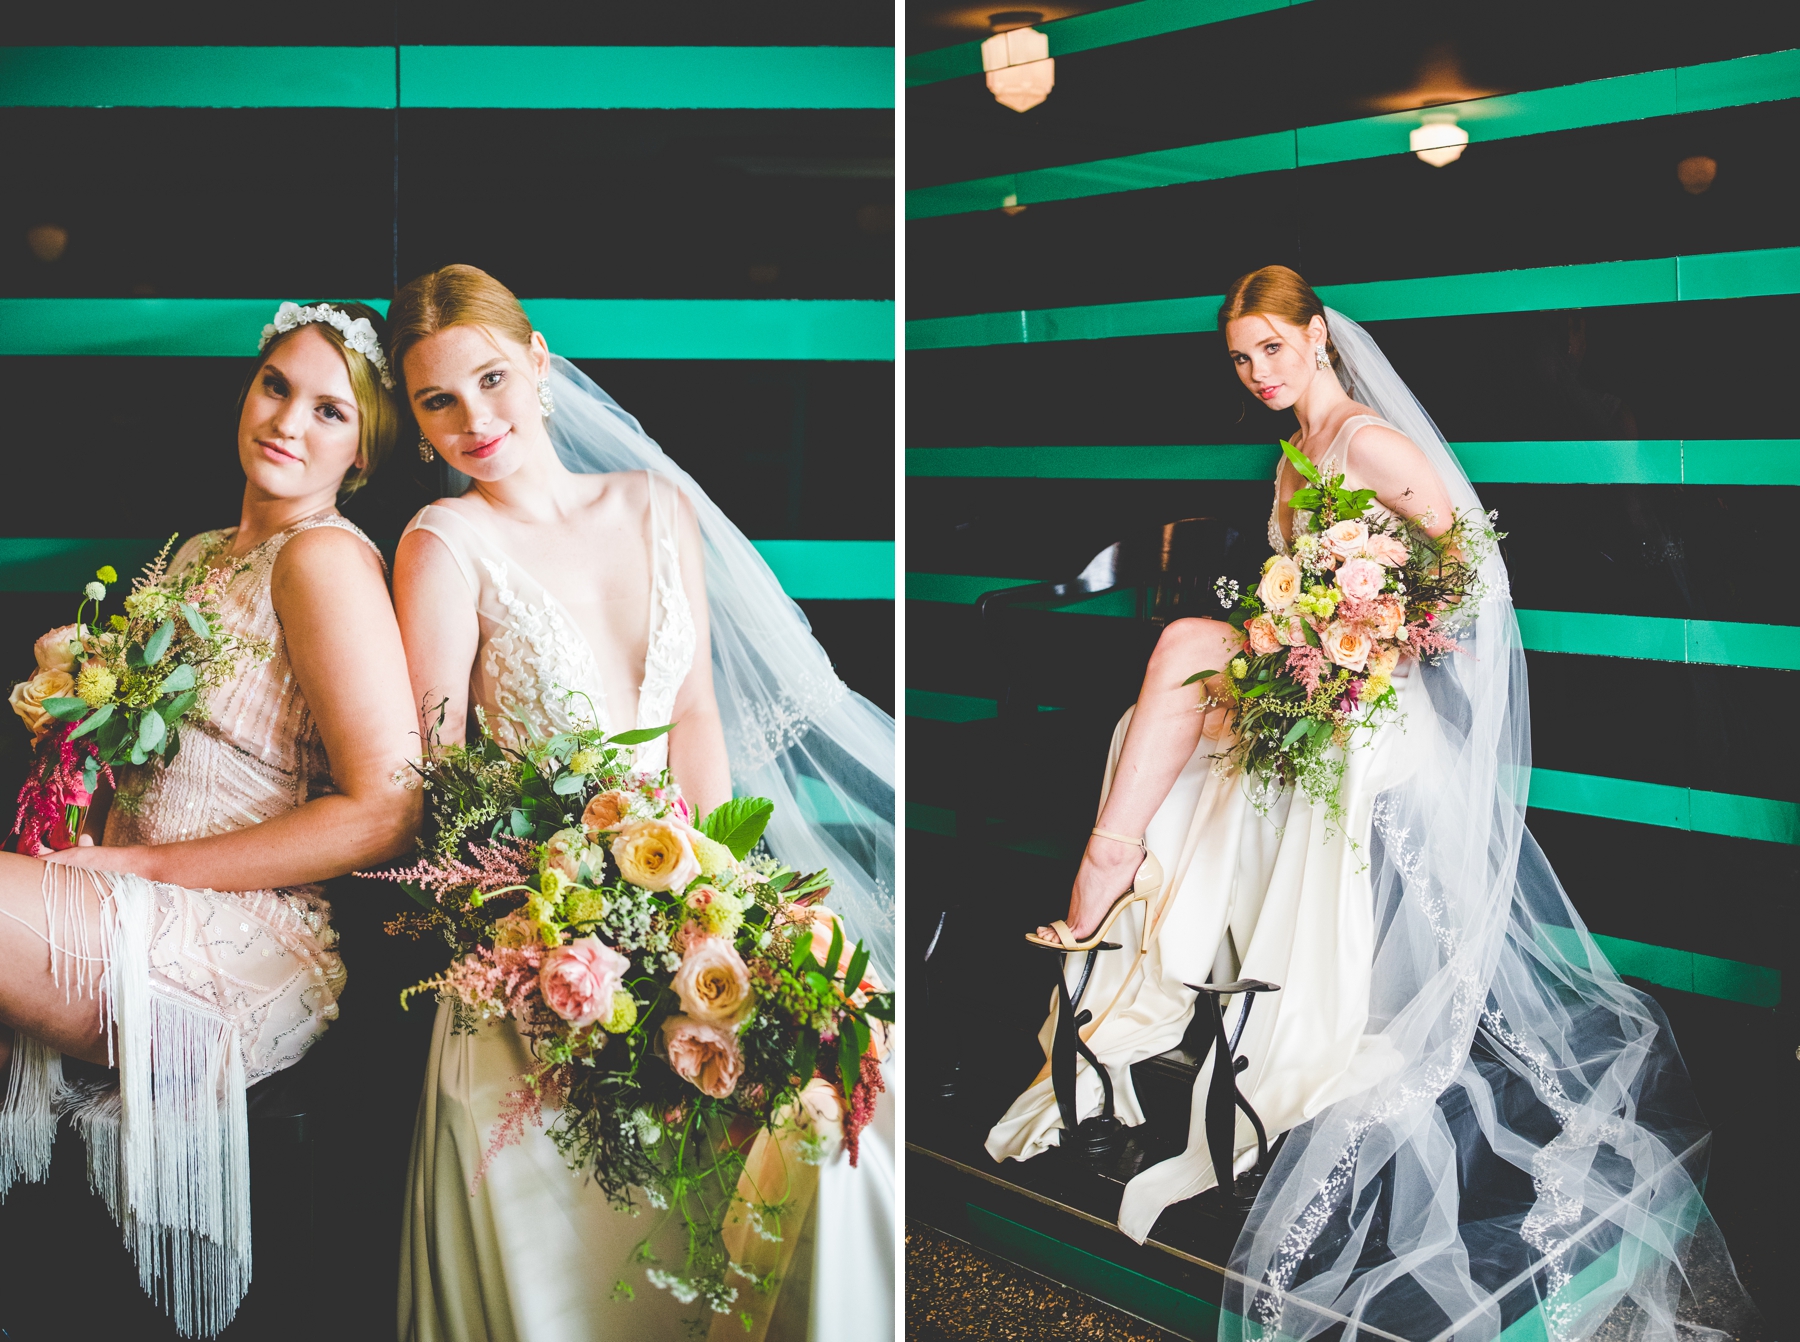 Vintage Bride and Bridesmaid Photos at the Hermitage Hotel, Southern Wedding Photographer Lissa Chandler